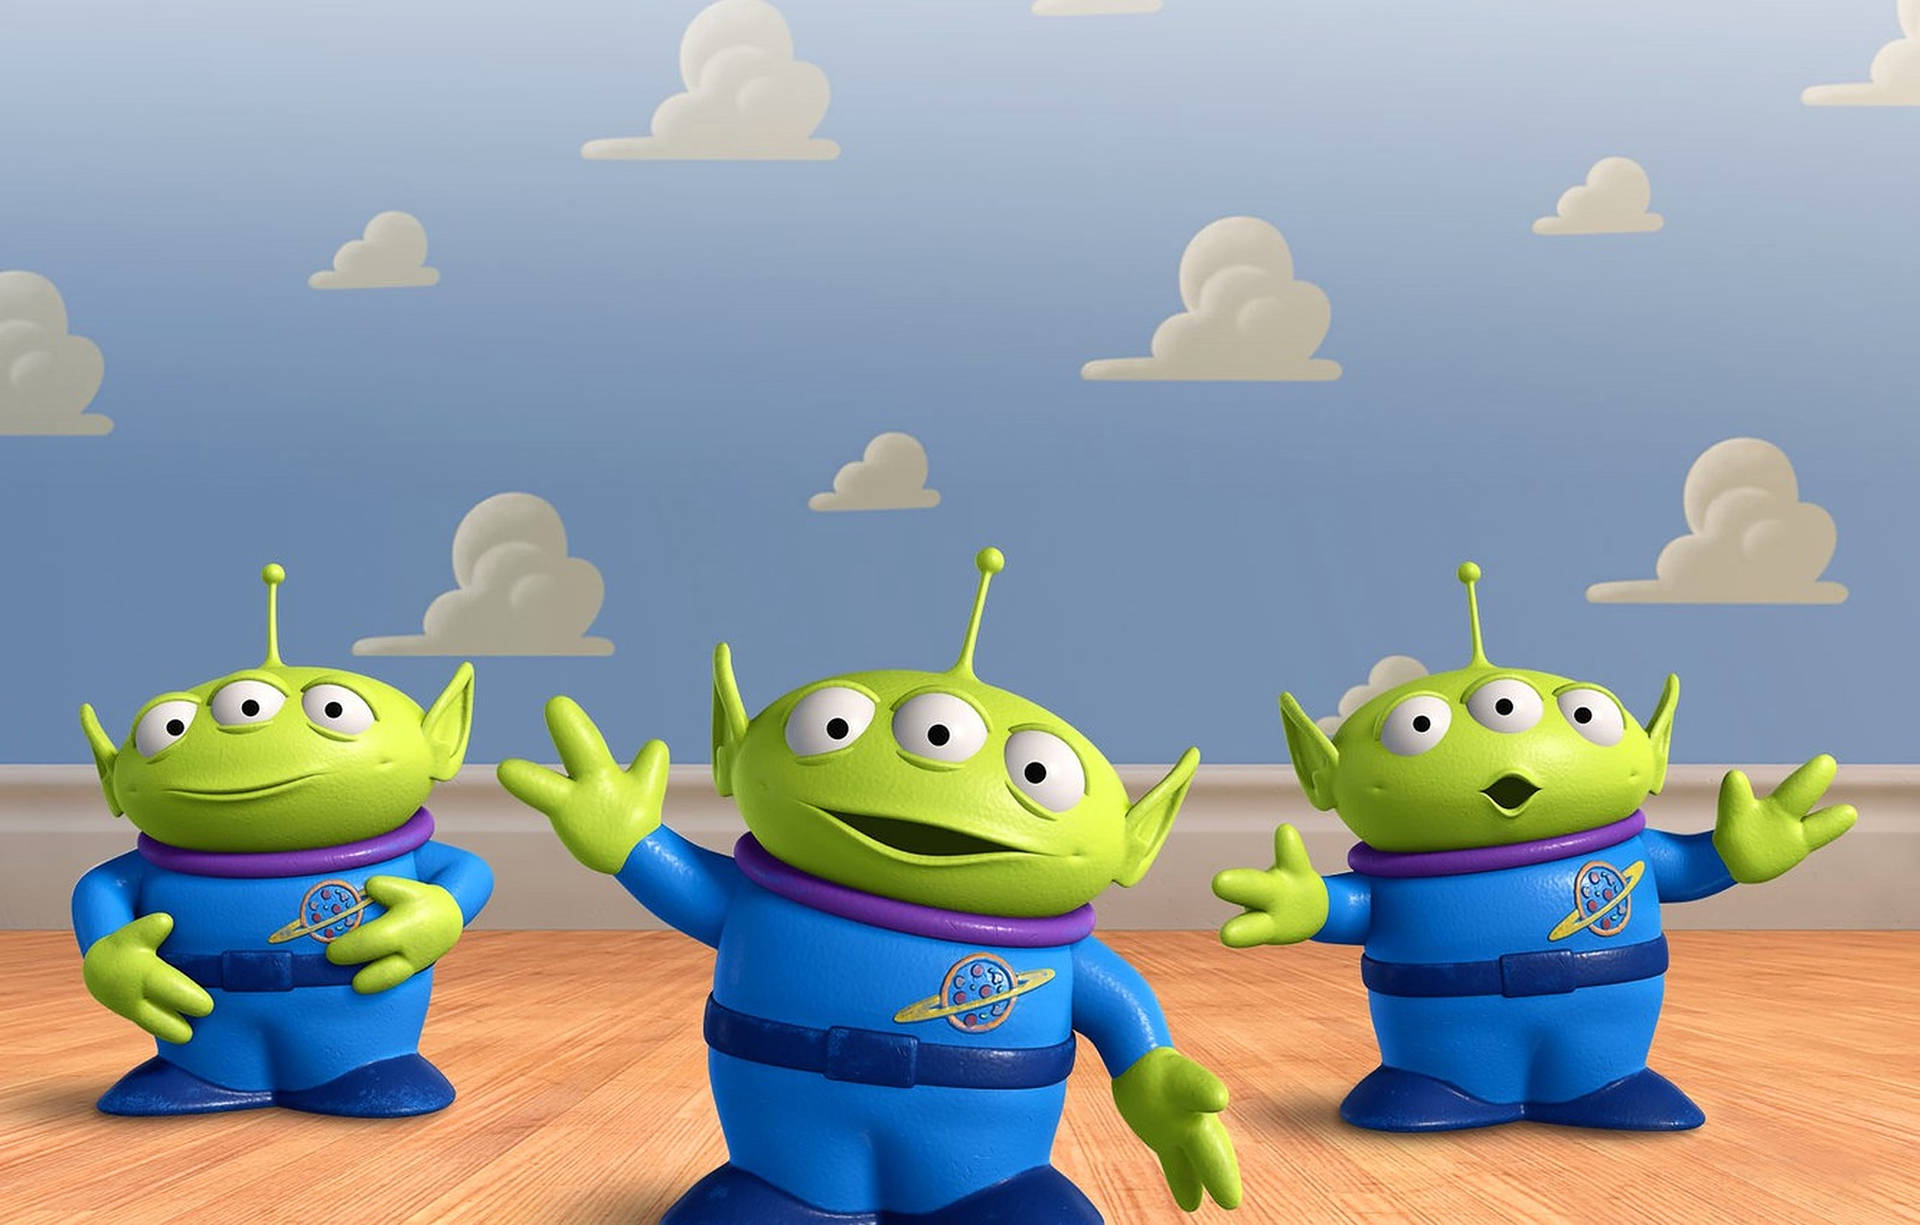 Toy Story Alien Against Cloudy Sky Background